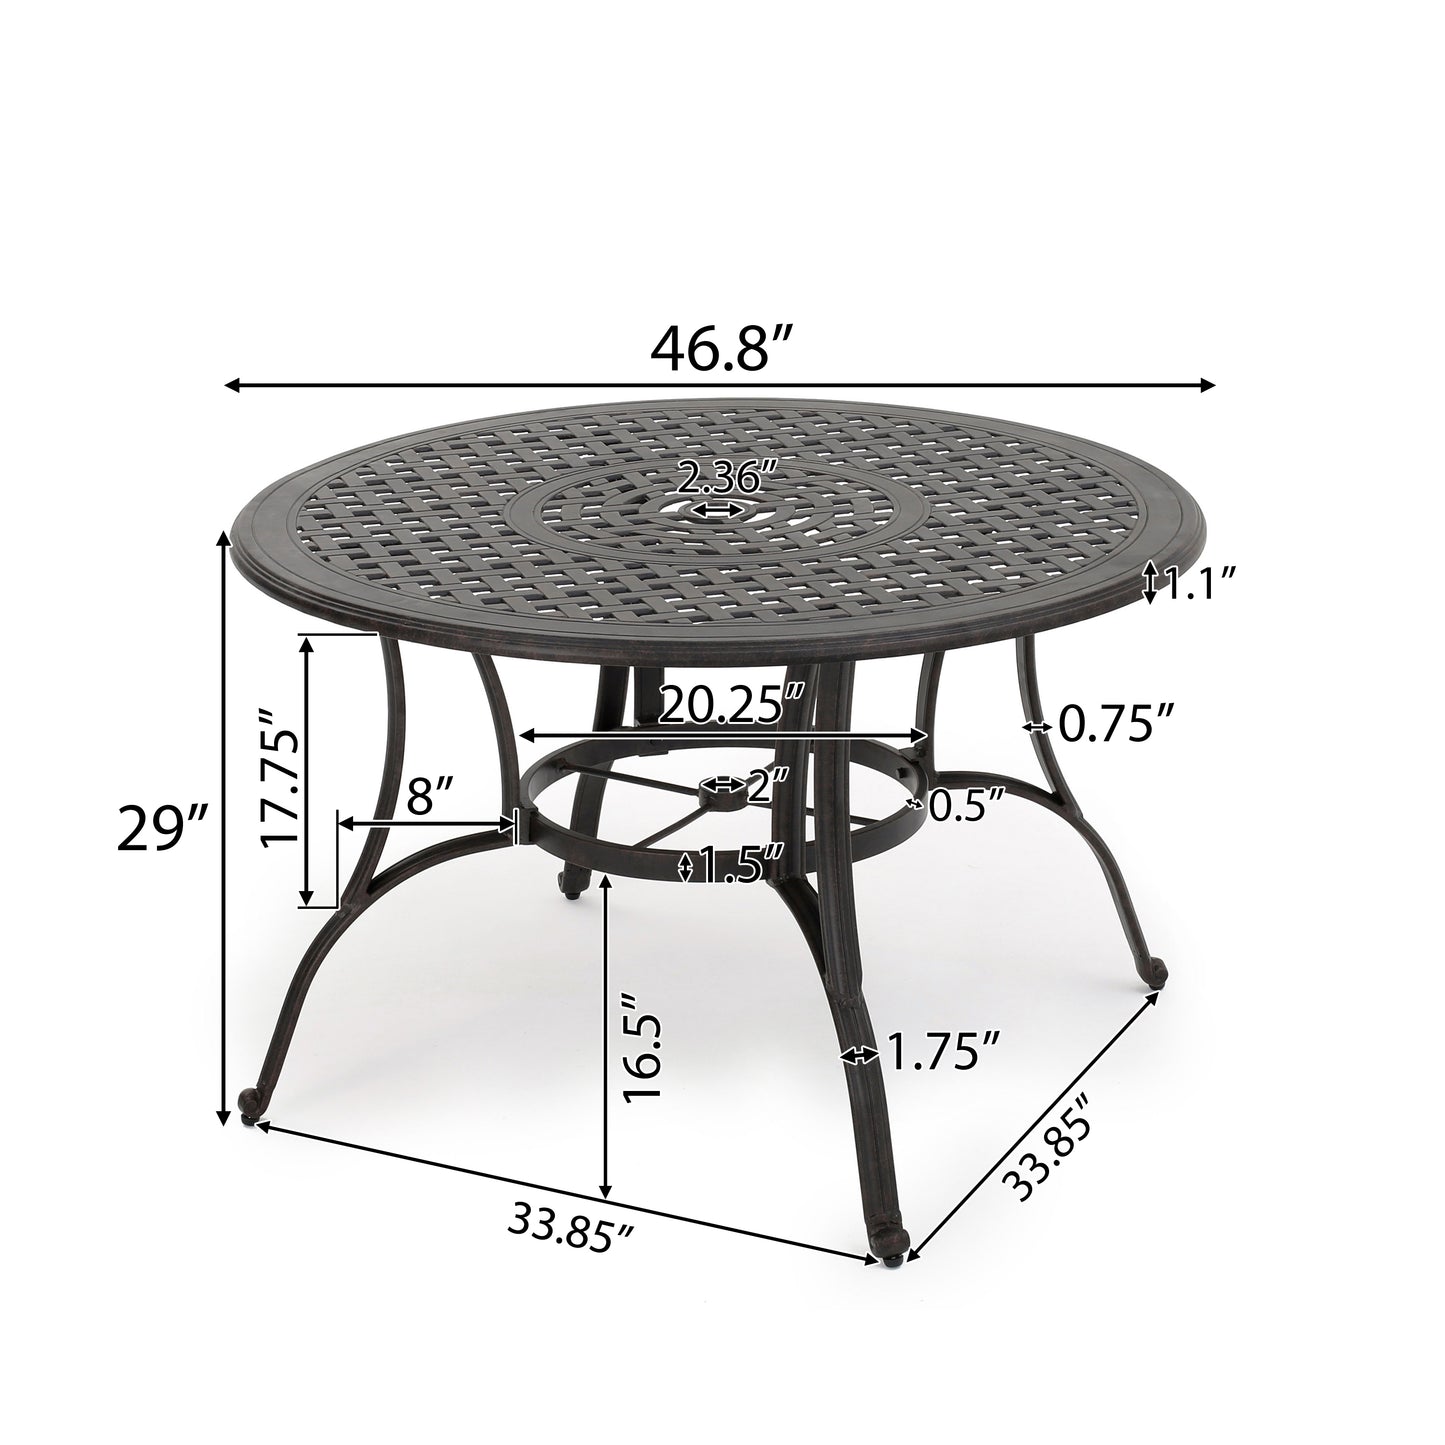 Fonzo Outdoor Bronze Cast Aluminum Circular Dining Table (ONLY)